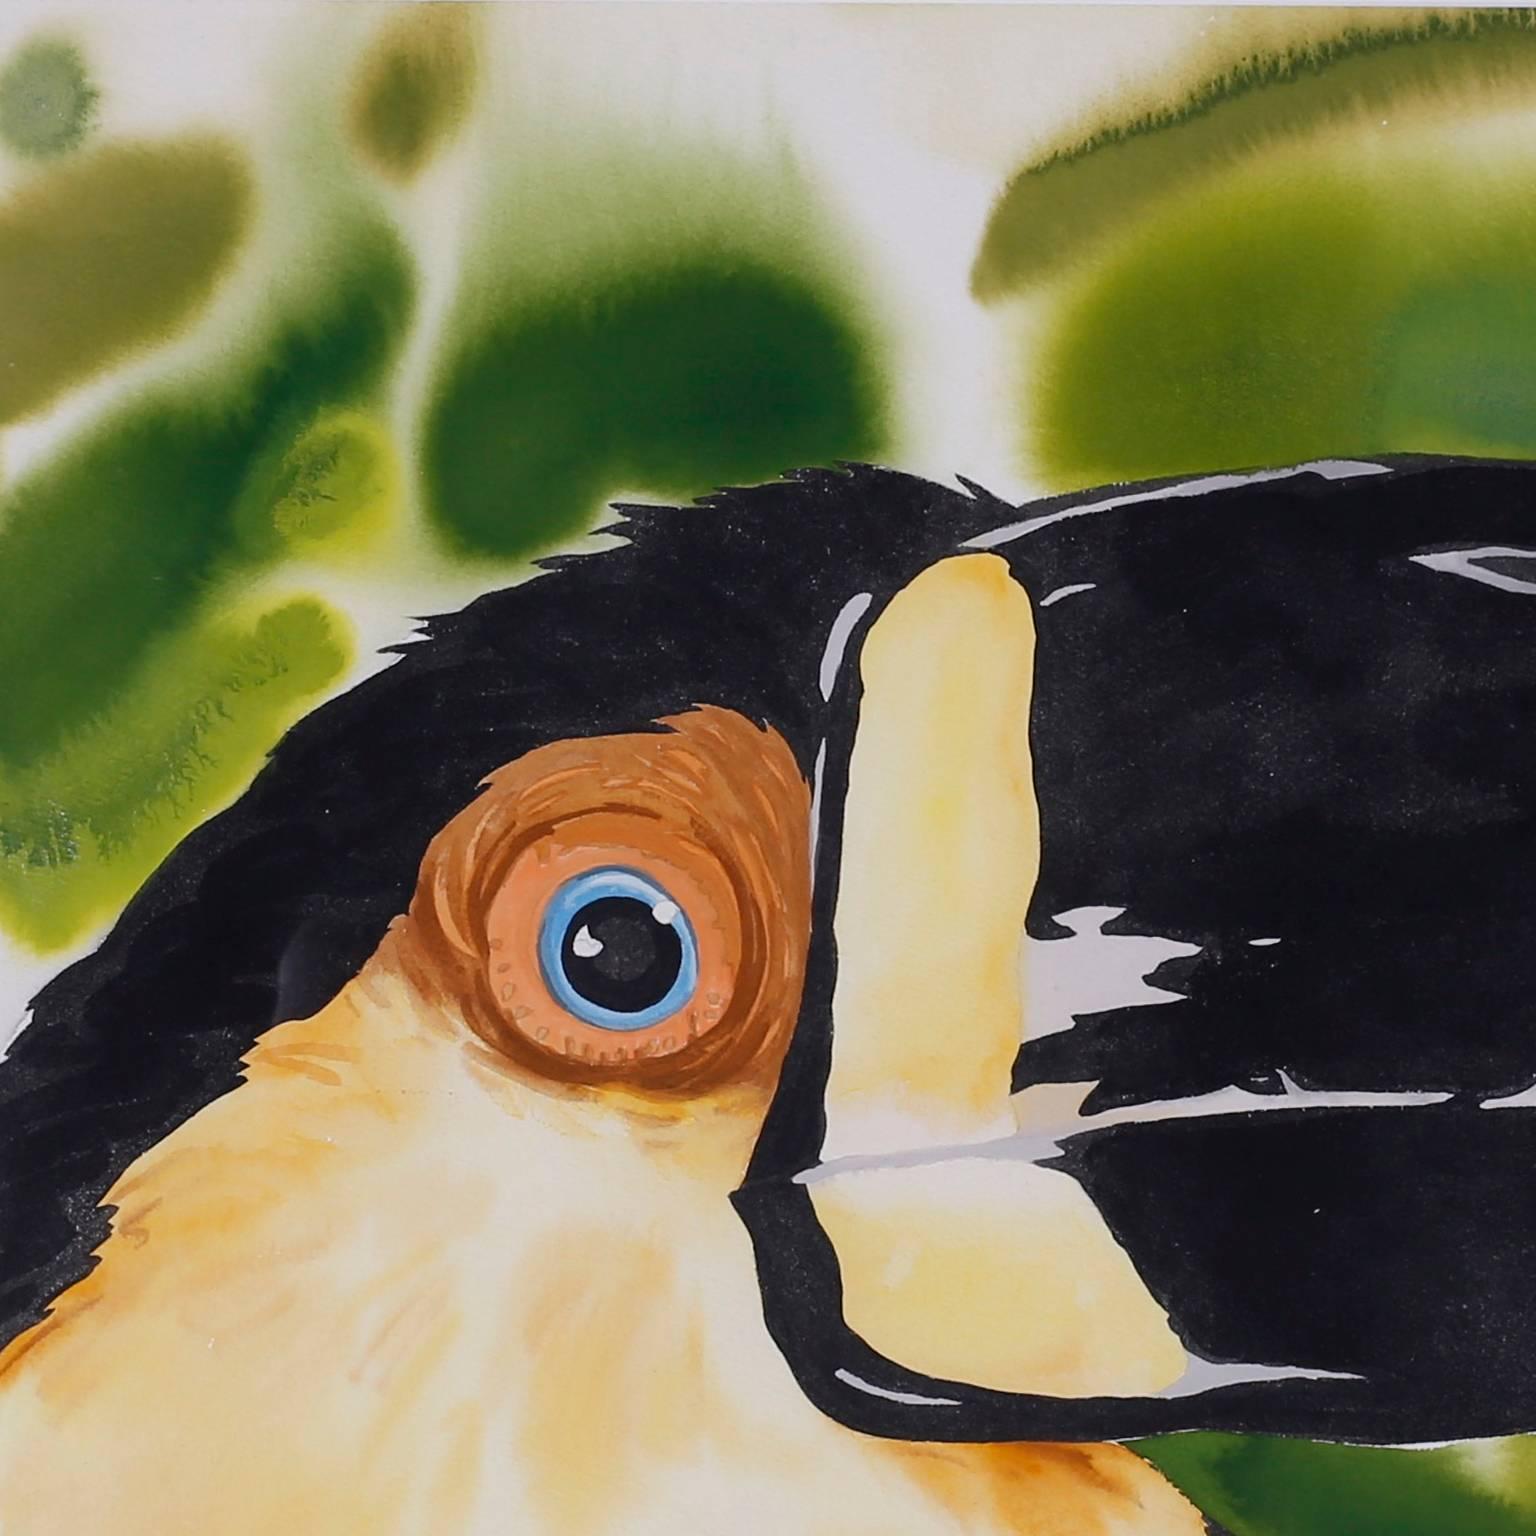 Bold watercolor painting on paper of a toucan or bird on paper with
evocative tropicals colors and an amusing presence. Signed Timothy
Bailey 86 on the lower right.